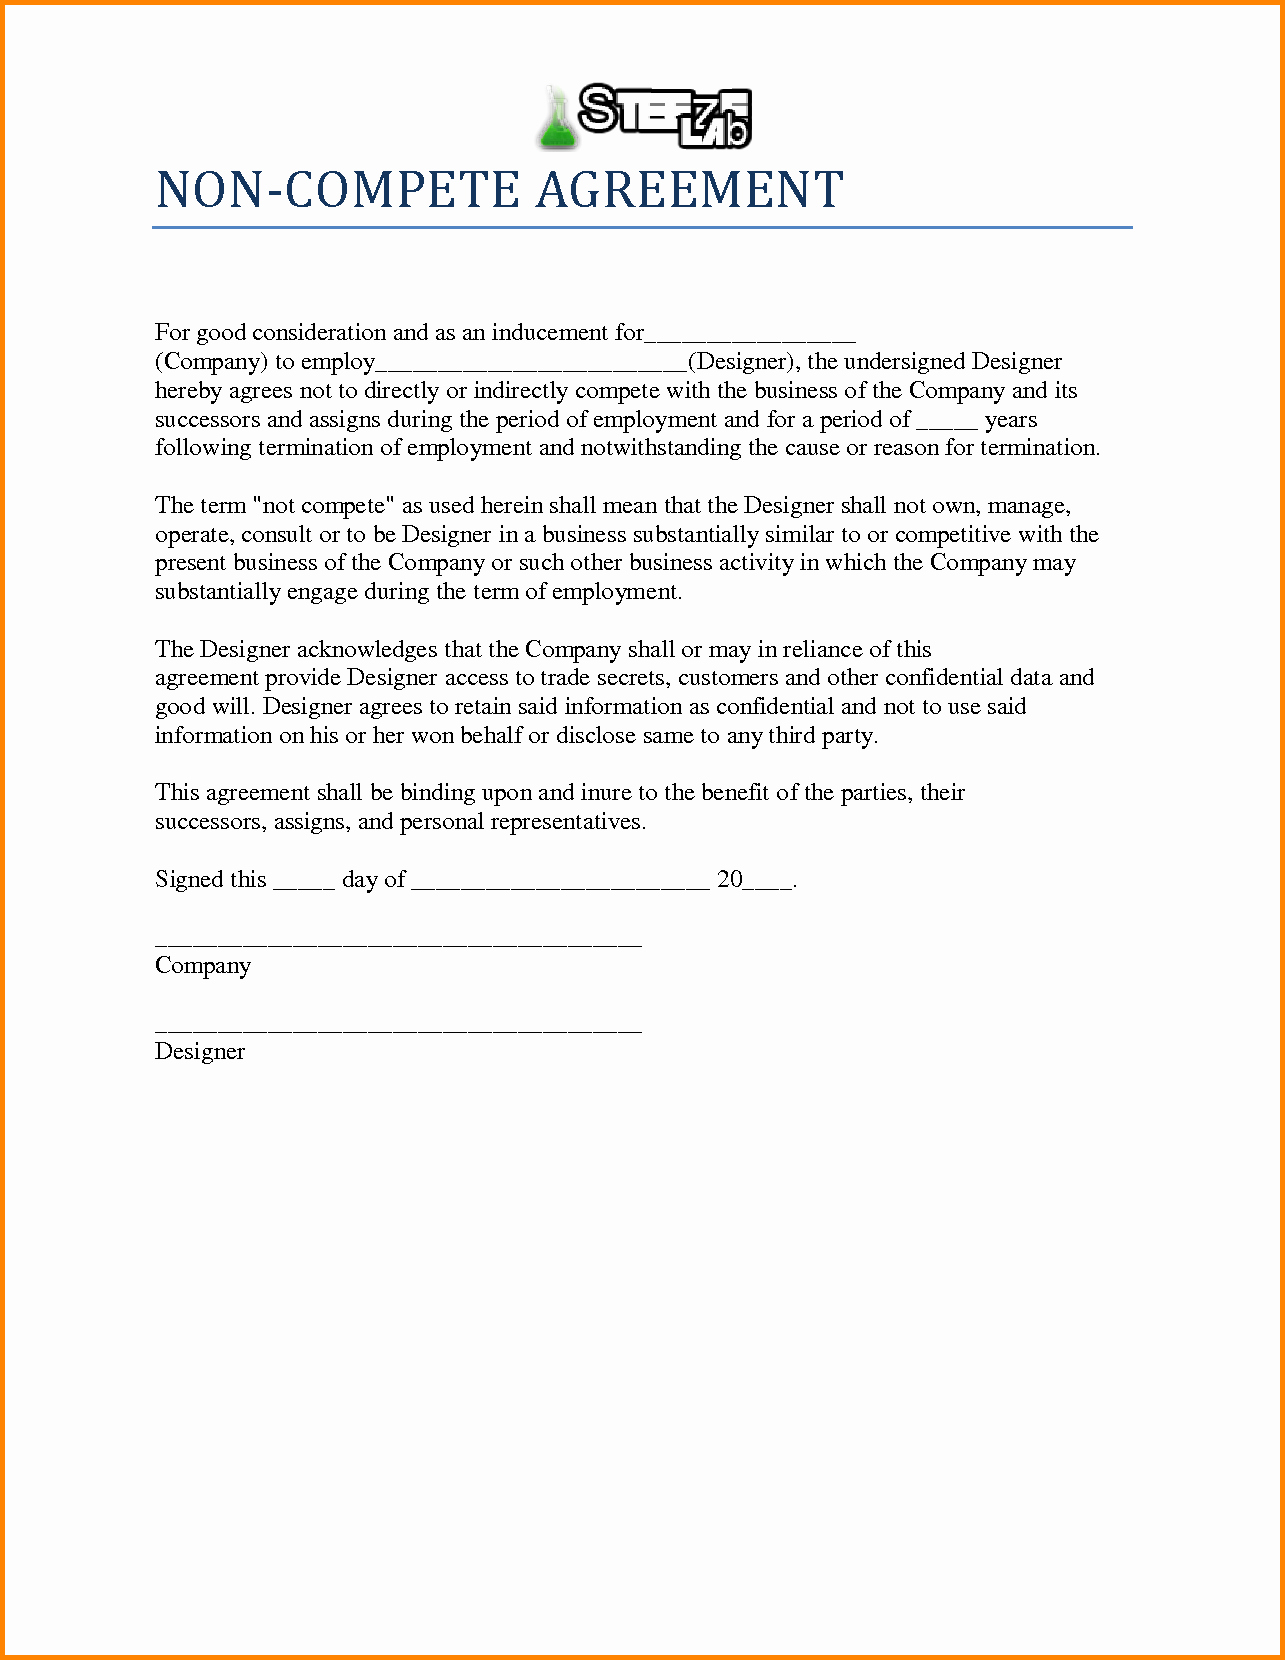 Contractor Non Compete Agreement Template Unique Agreement Non Pete Agreement form